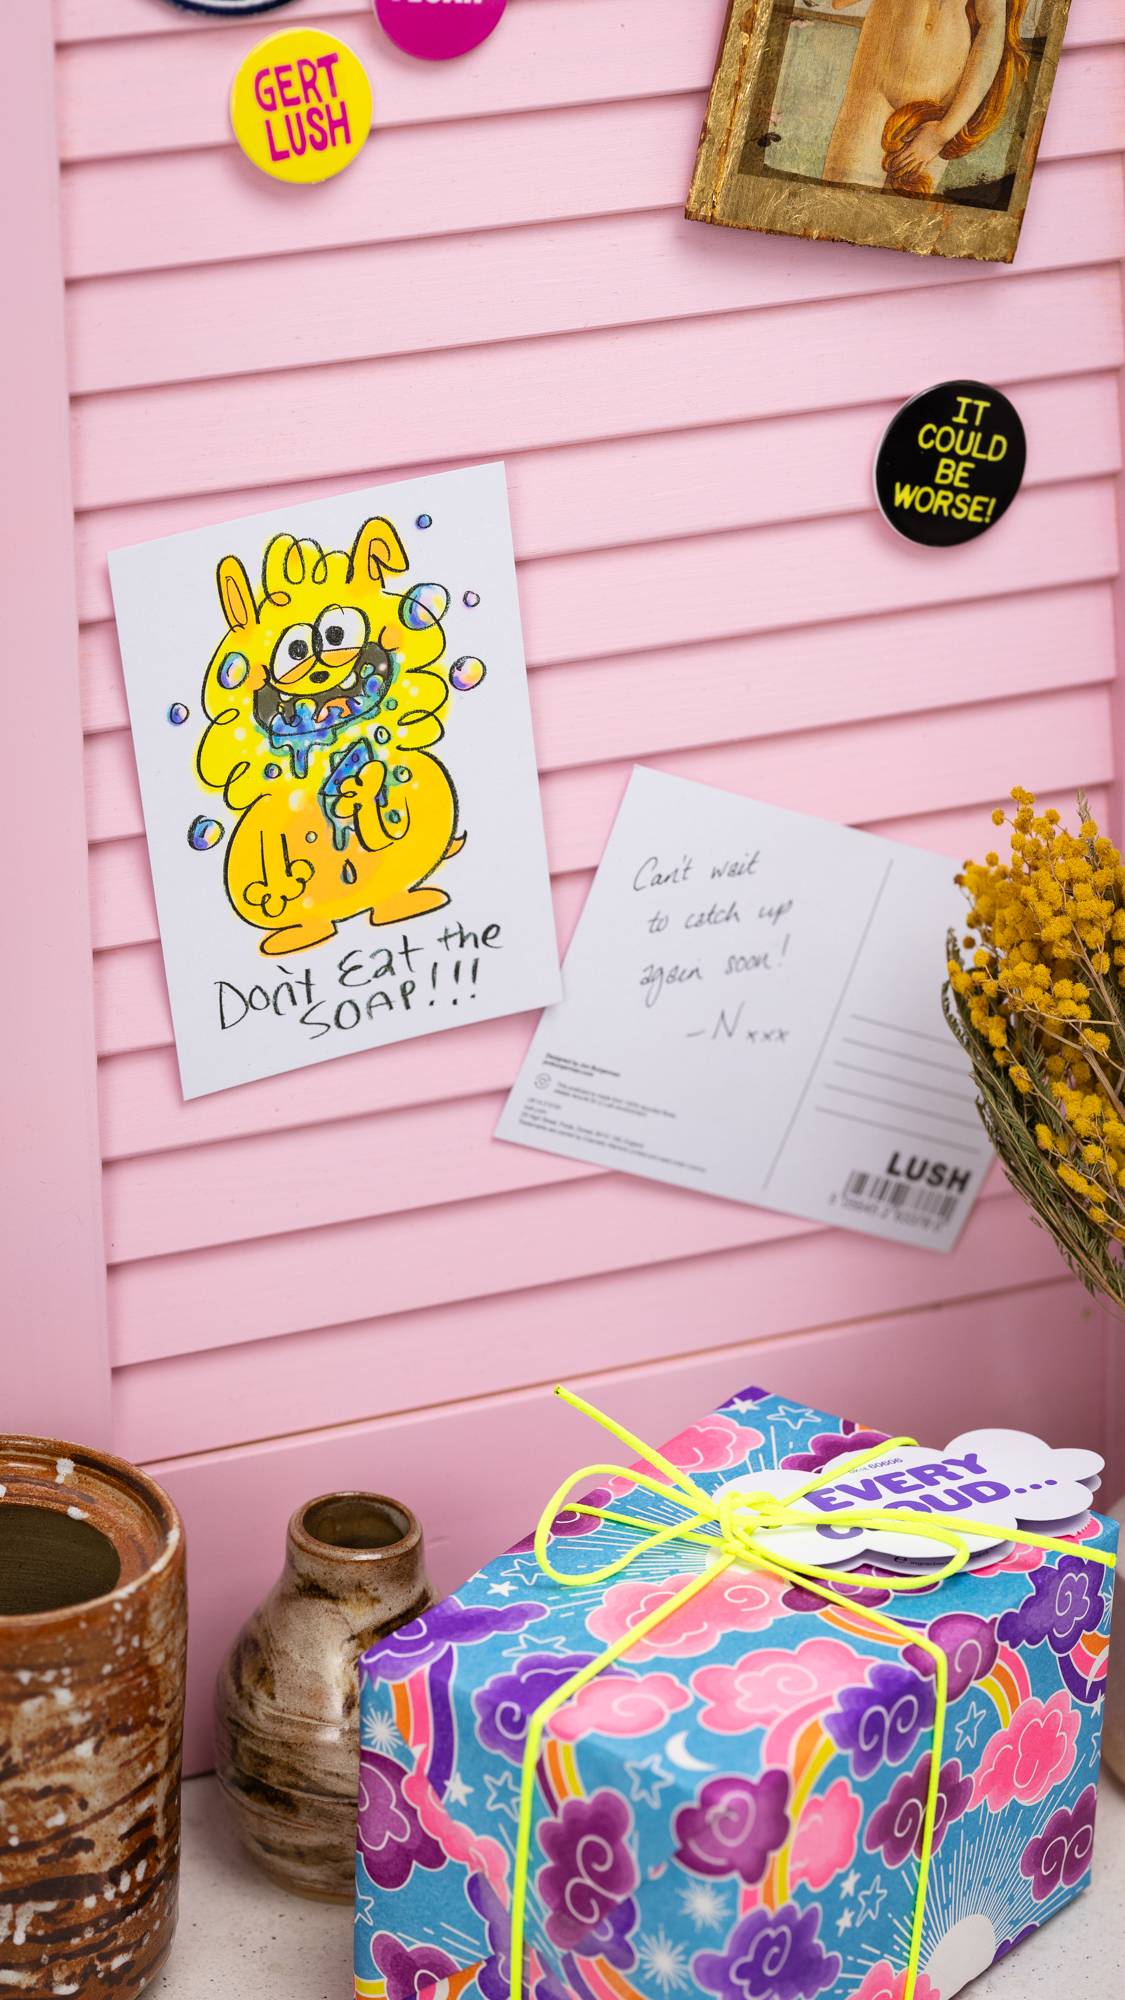 Image shows the Don't Eat The Soap postcard on a pastel pink noticeboard surrounded by badges and a gift.